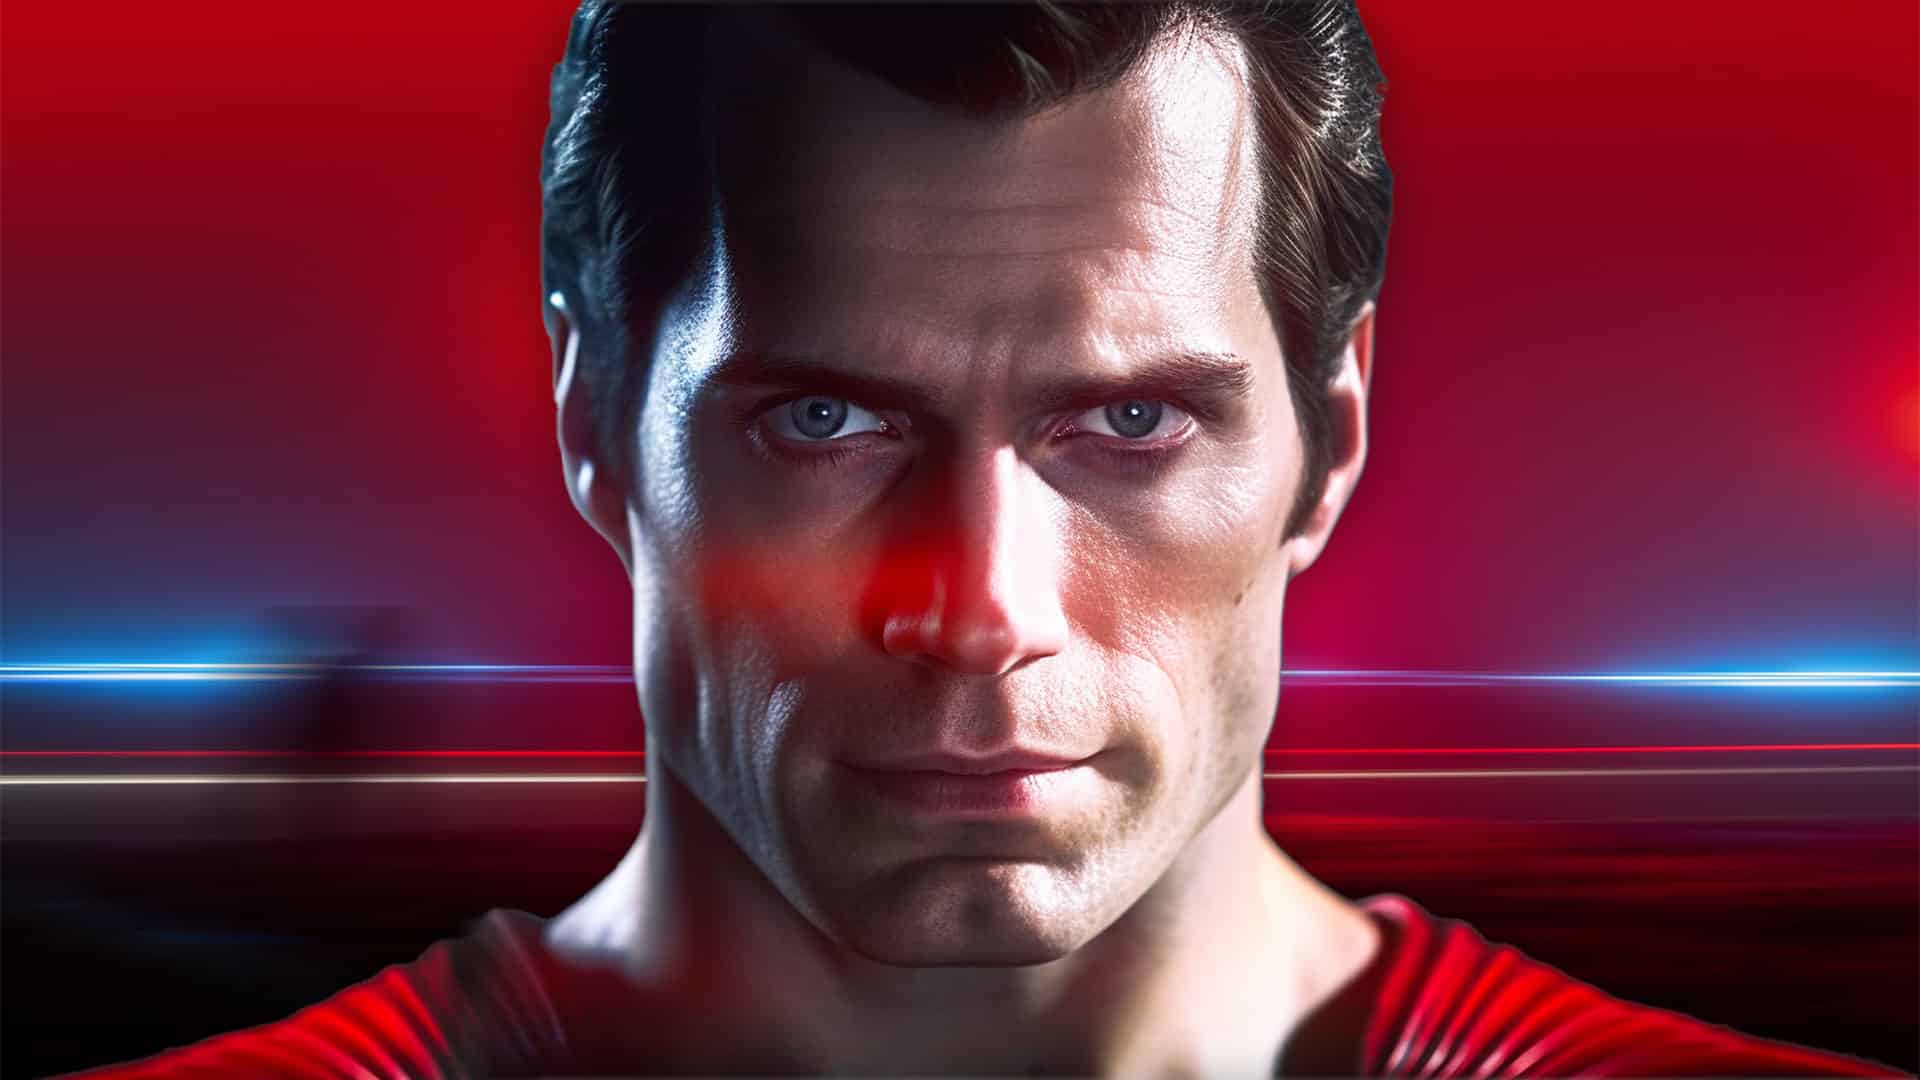 Henry Cavill's Man Of Steel 2: What Fans Can Expect To See In The